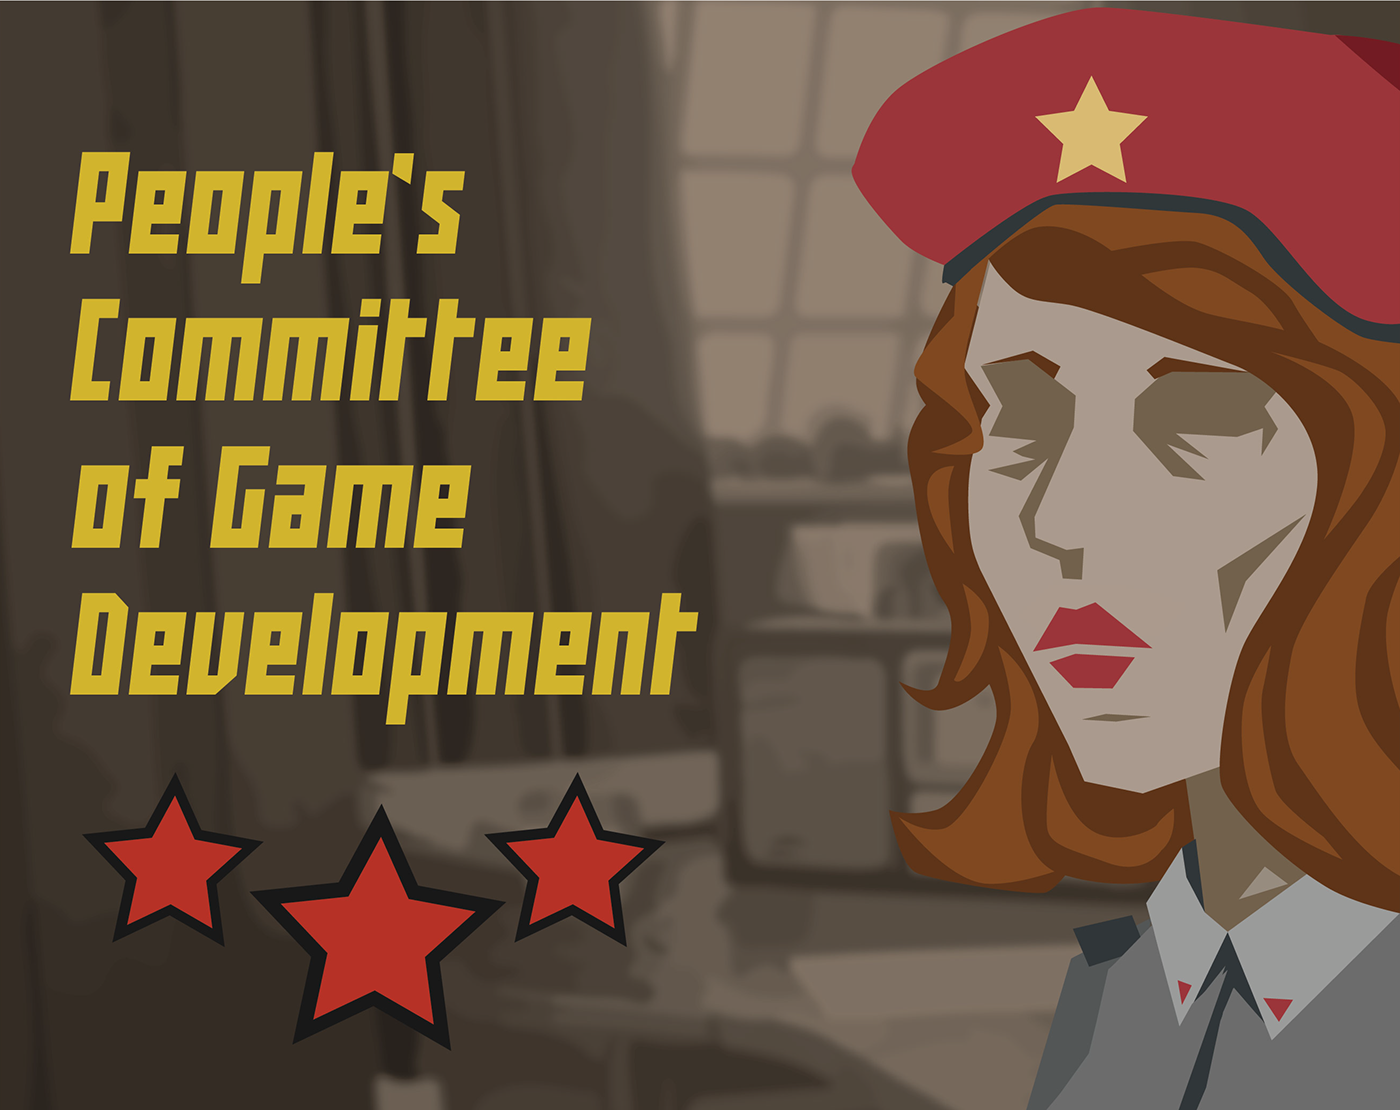 Soviet Russia socialist game ussr committee process game design  card game propoganda